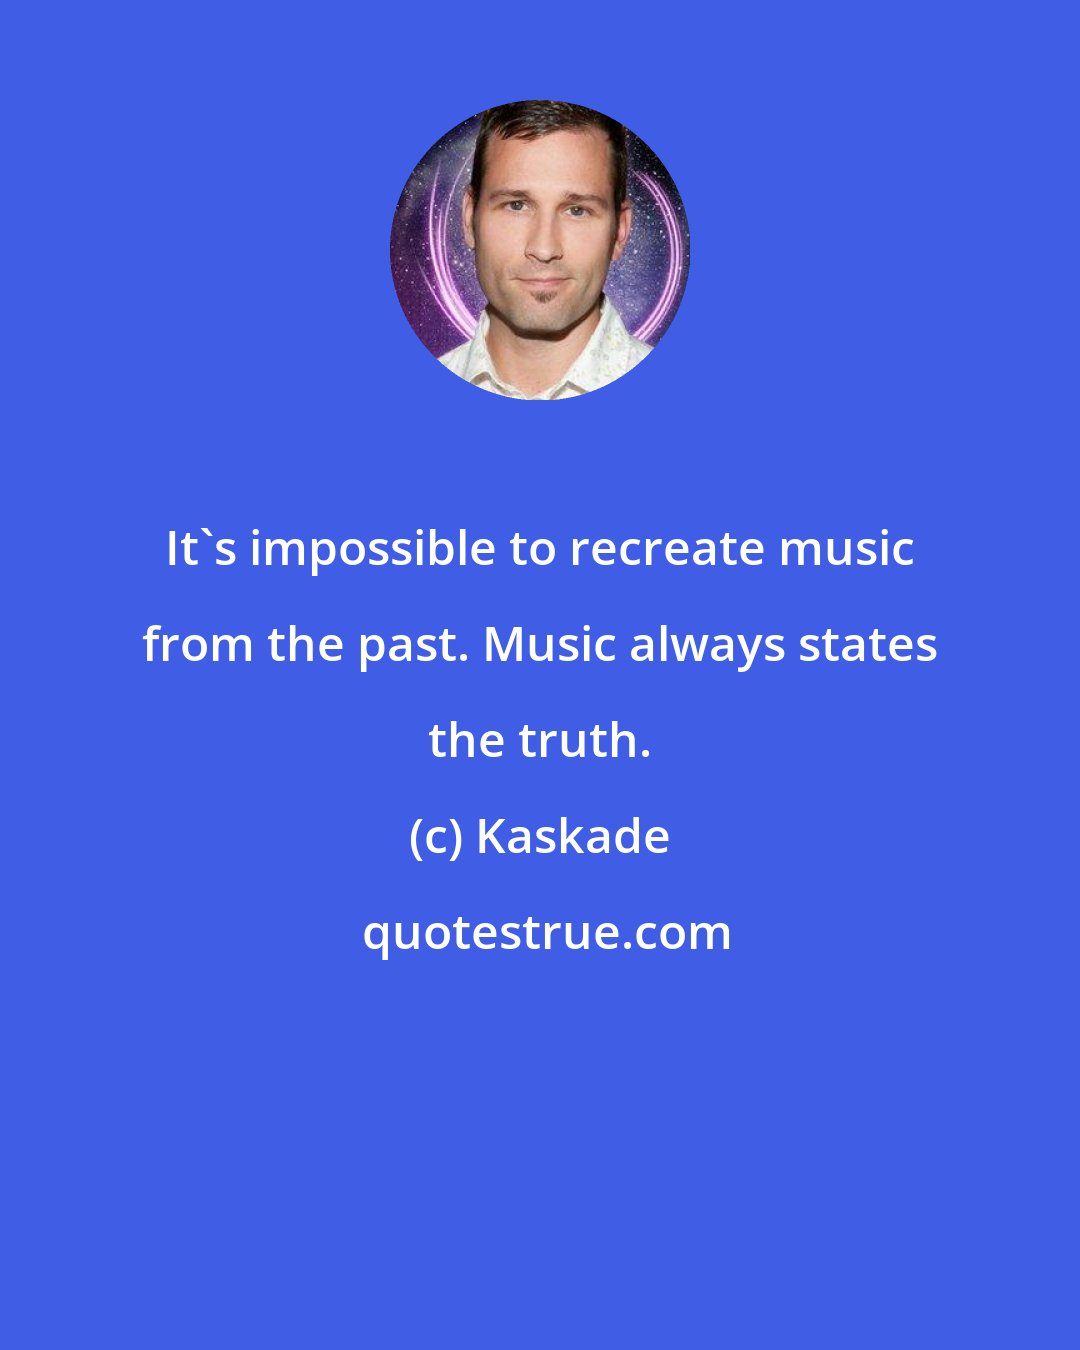 Kaskade: It's impossible to recreate music from the past. Music always states the truth.